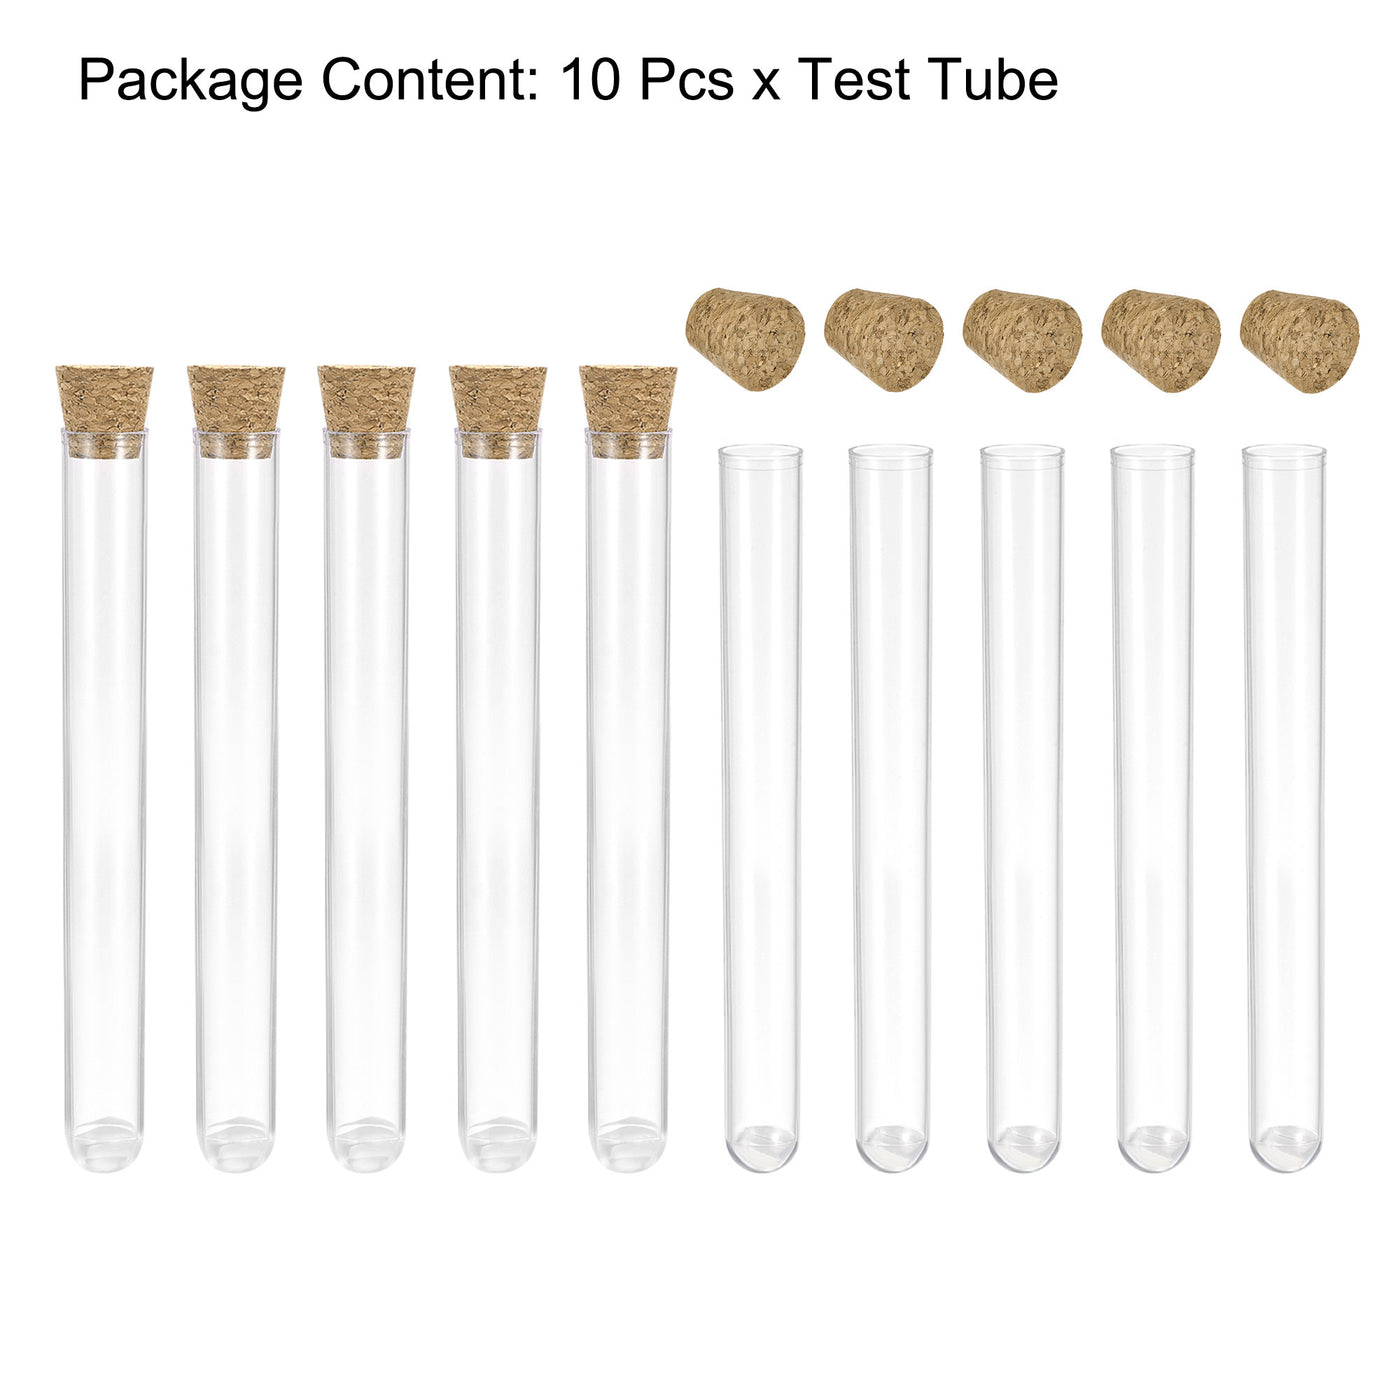 Uxcell Uxcell 10Pcs PS Plastic Test Tubes with Cork Stoppers, Round Base, 20x153mm